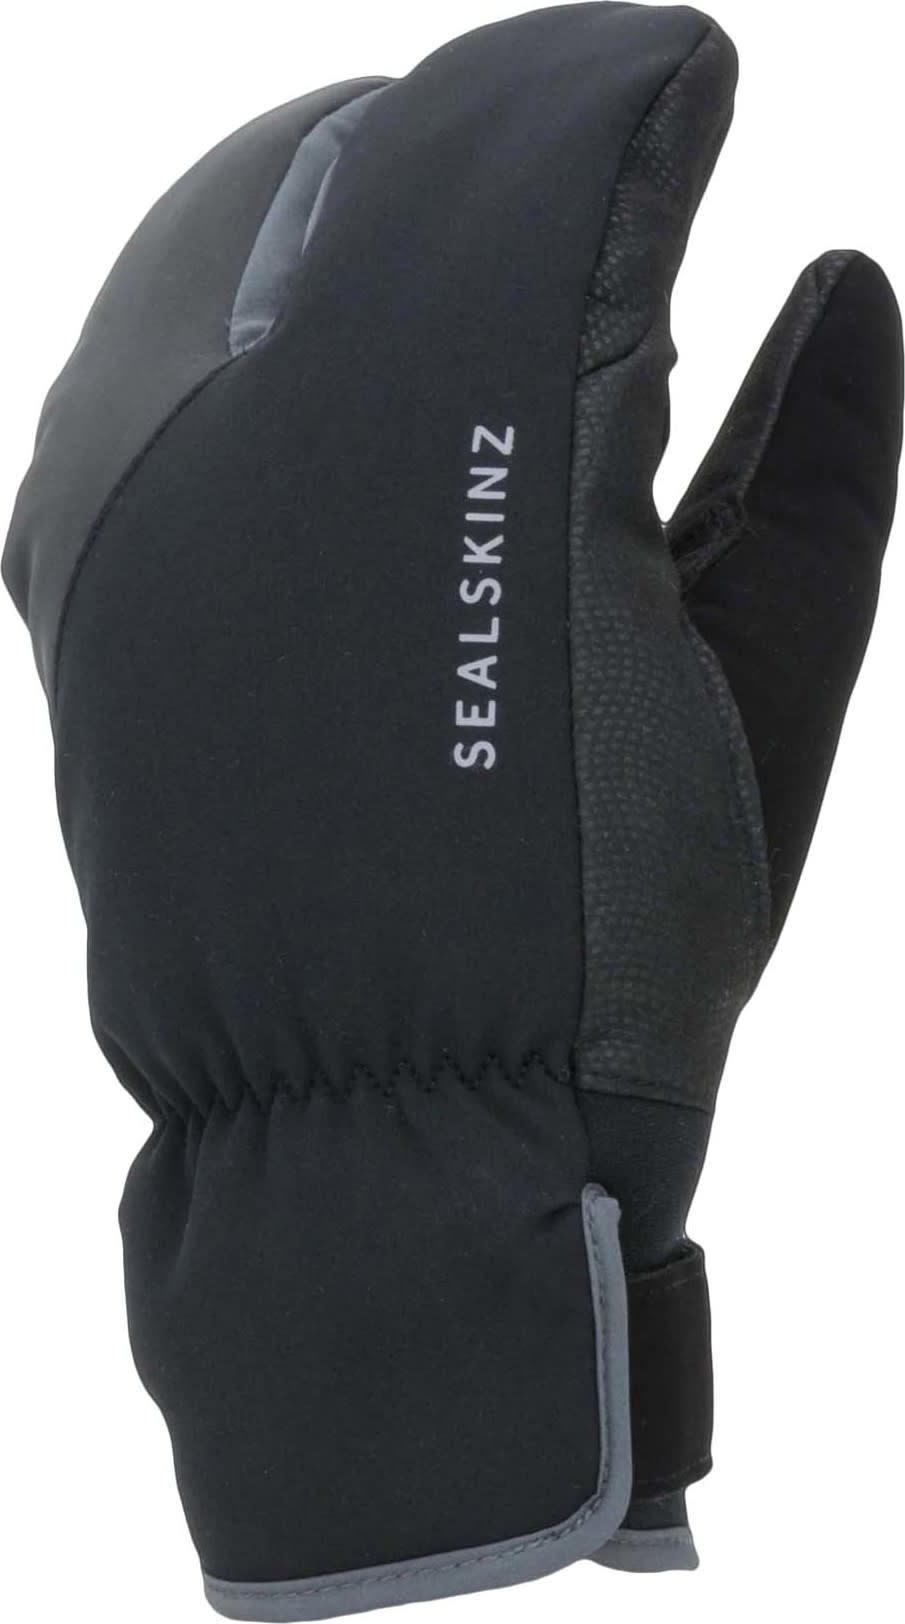 Waterproof Extreme Cold Weather Cycle Split Finger Glove Black/Grey